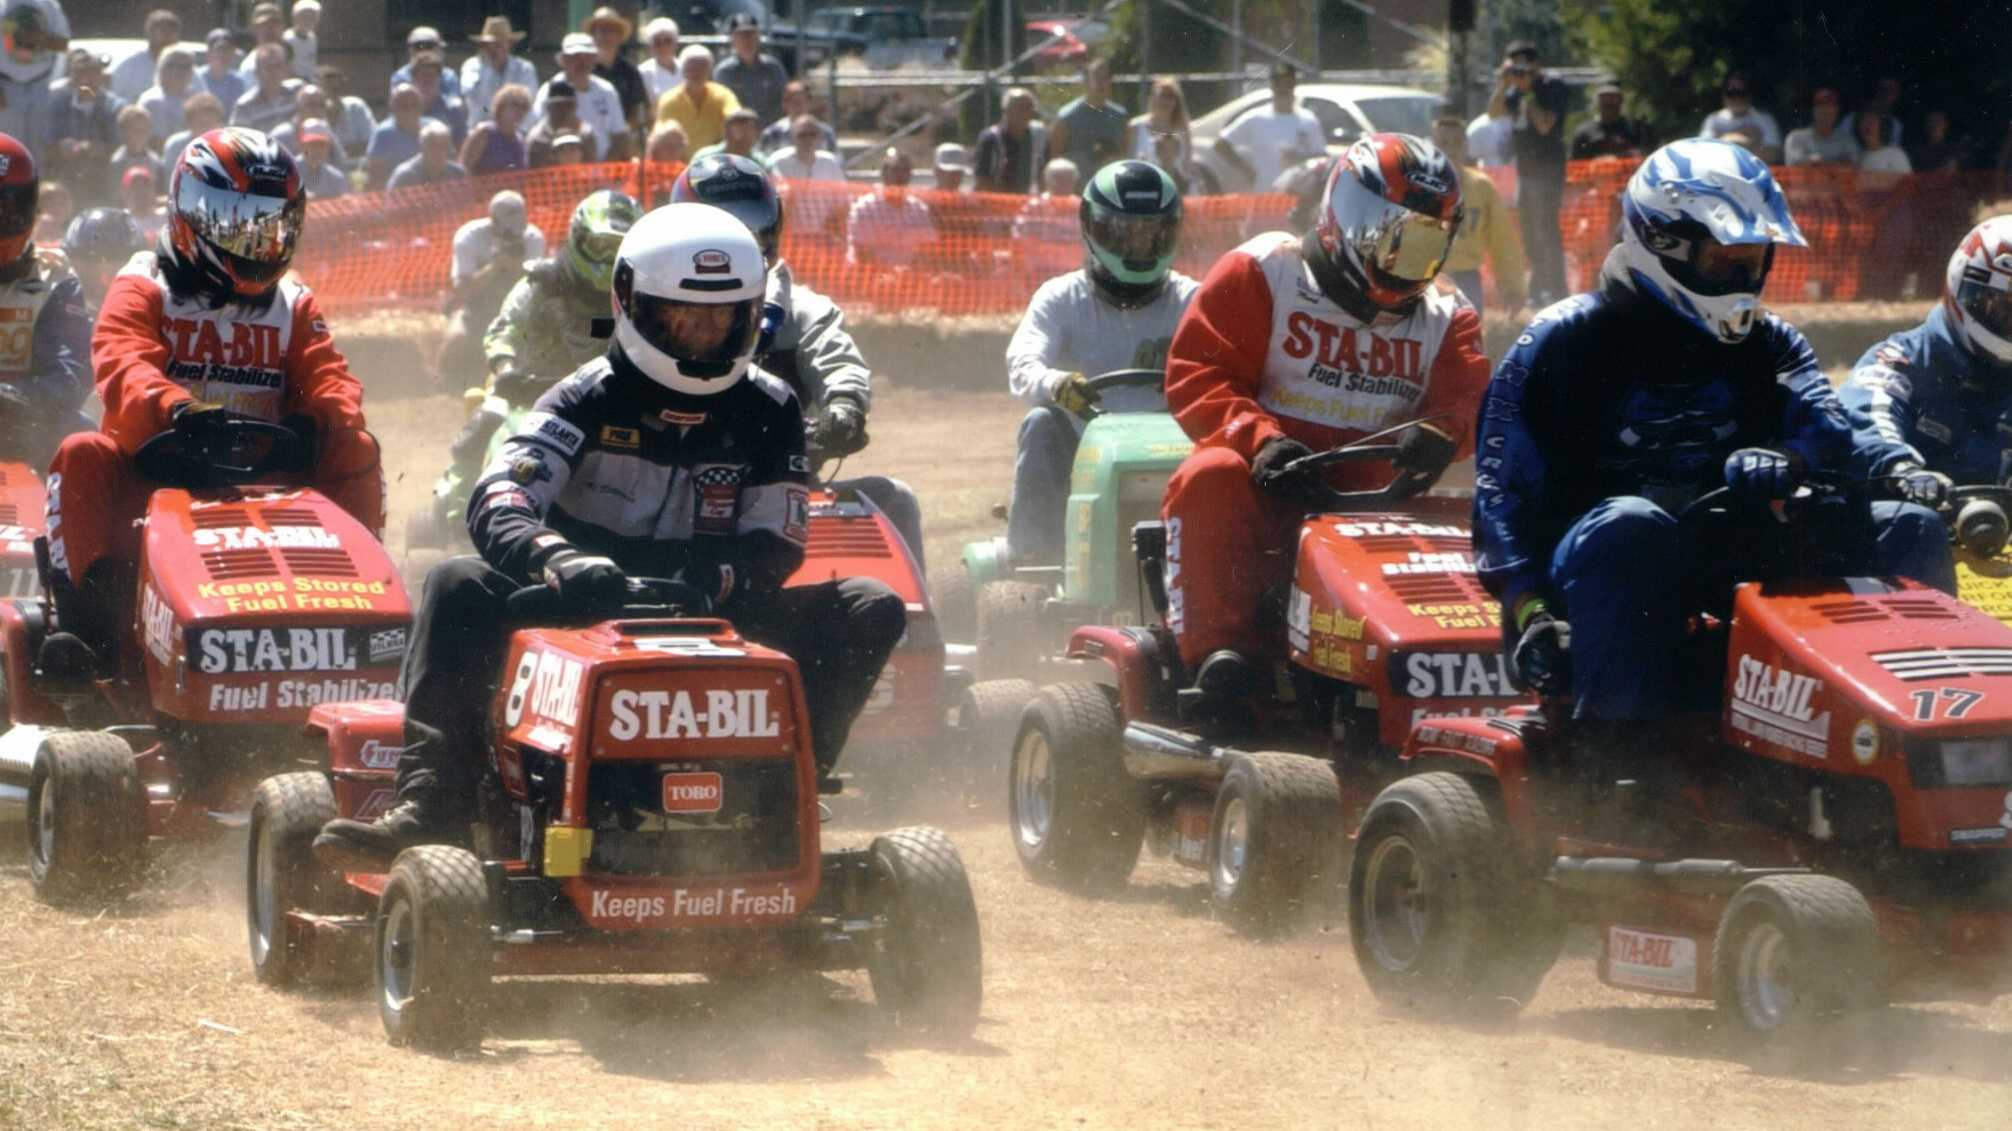 Watch customized lawn mowers race in Alpharetta this weekend for free